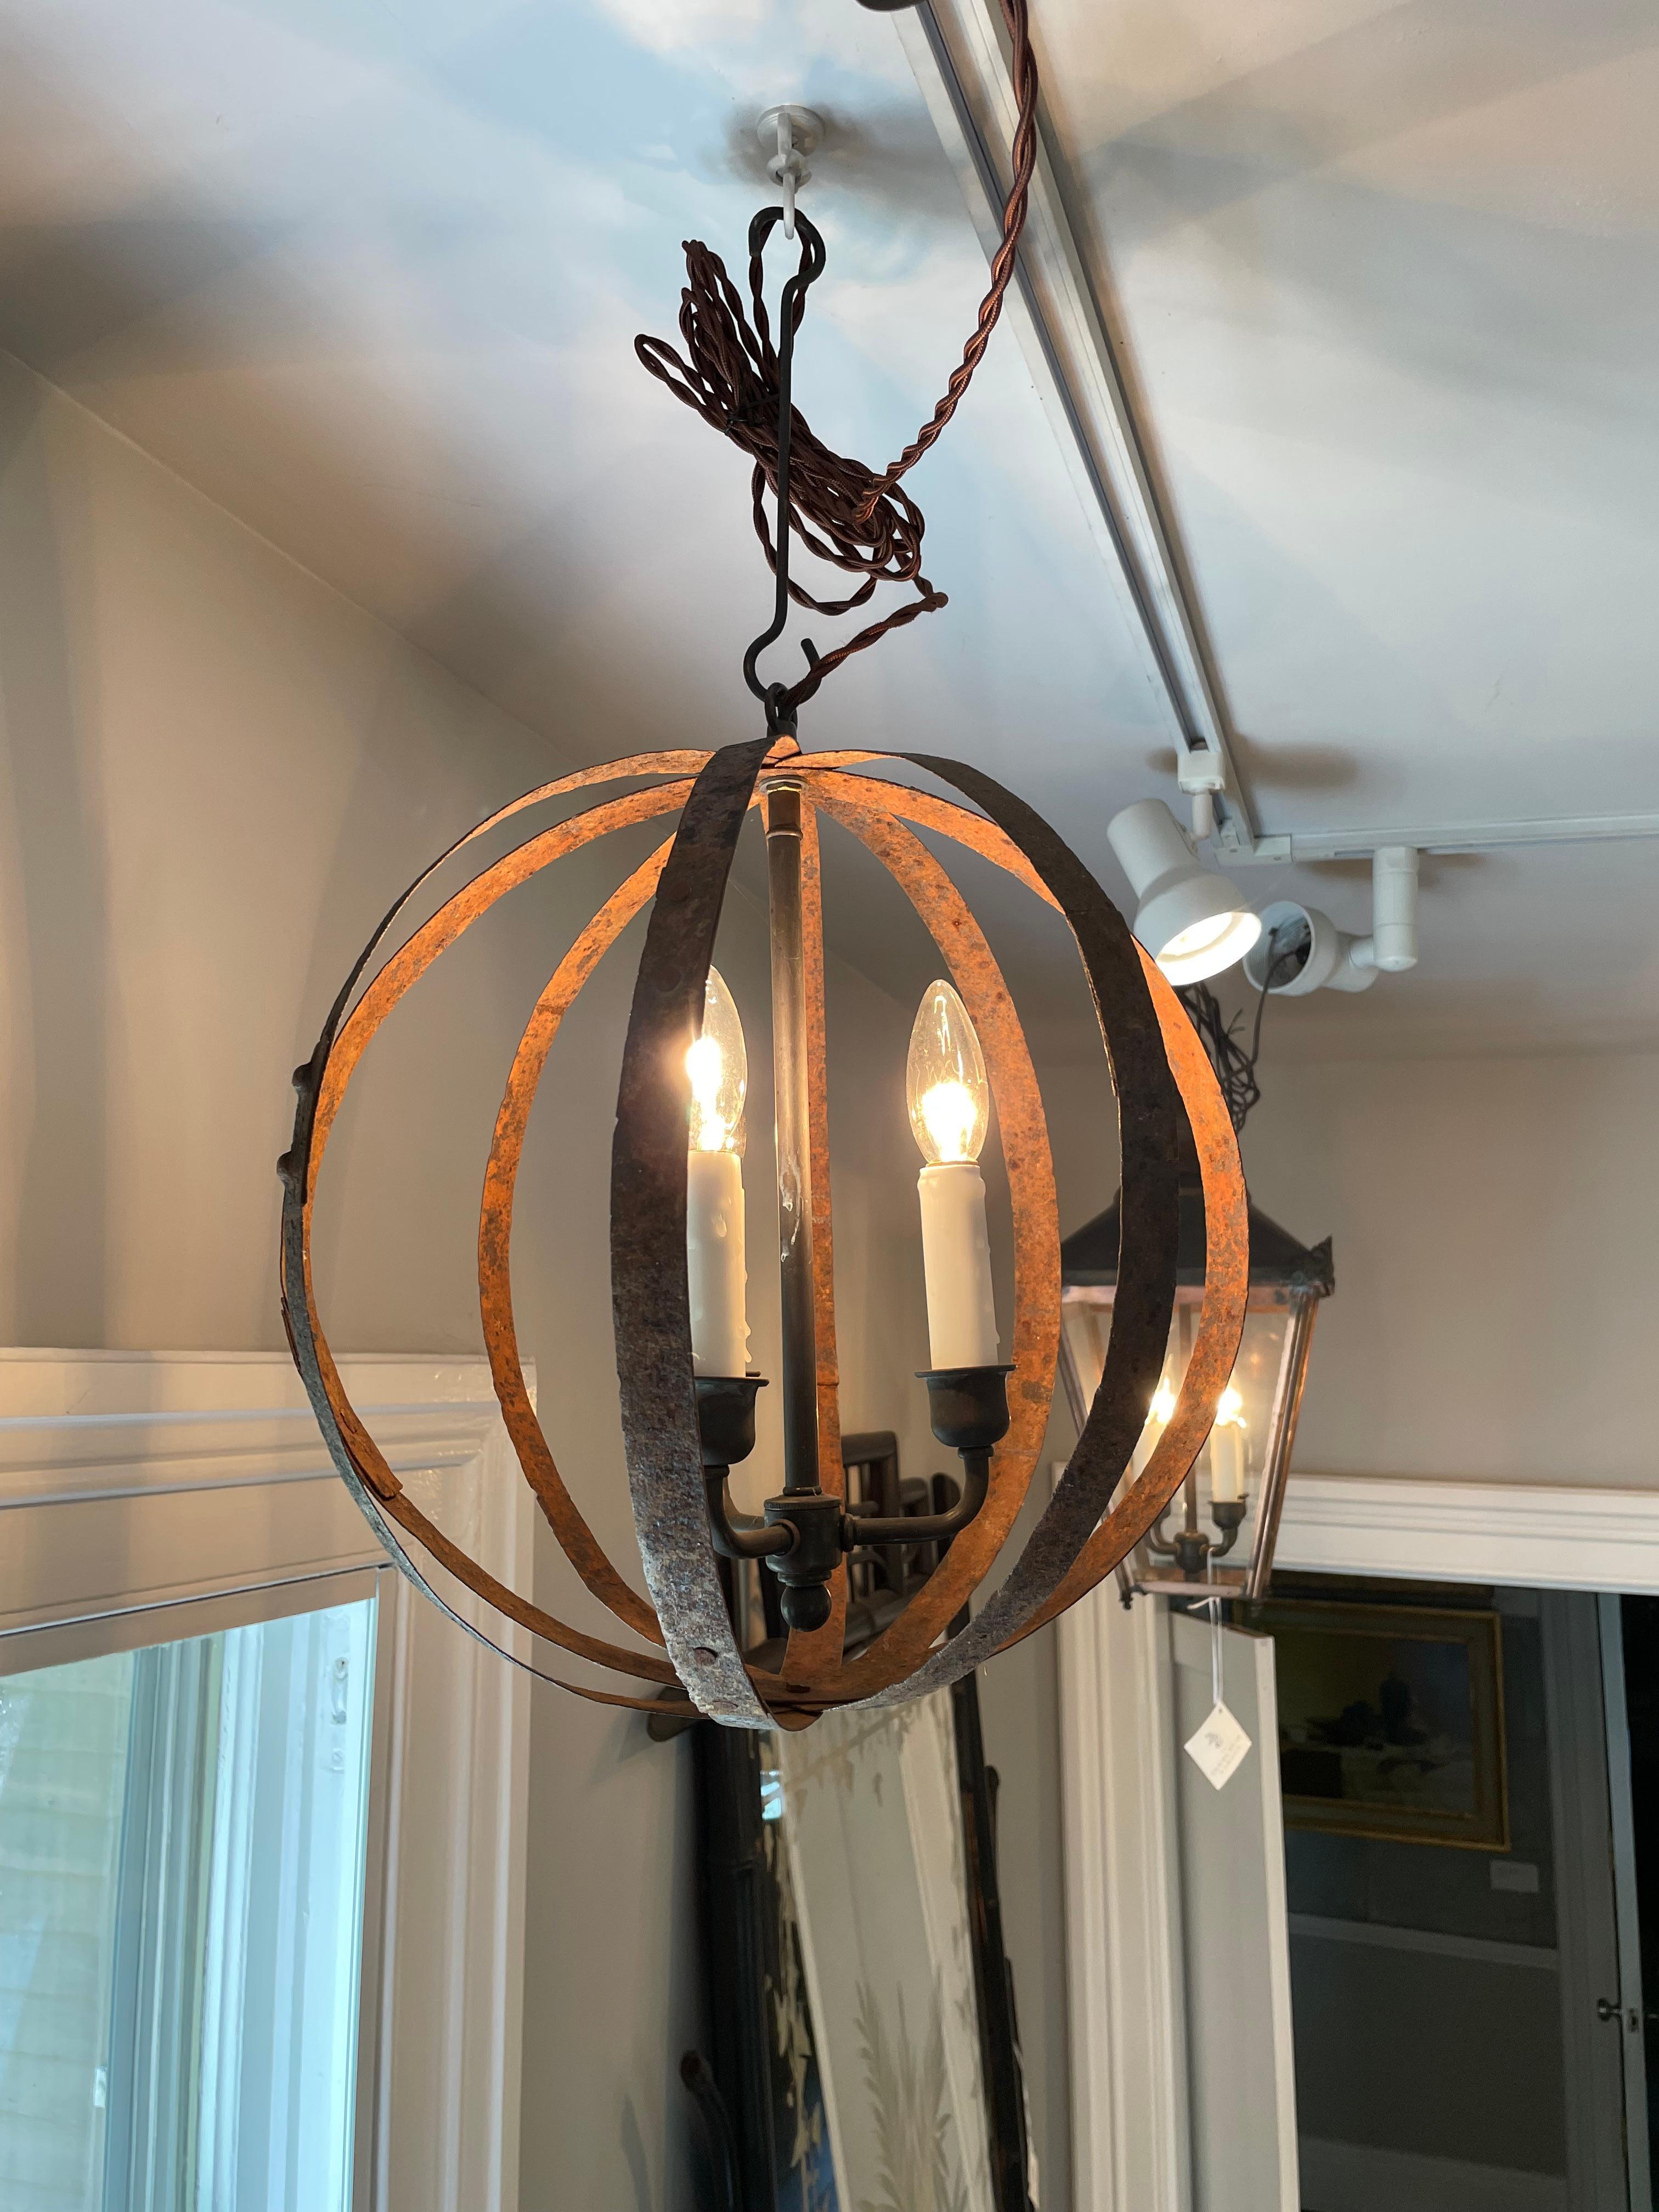 We are always on the lookout for unusual hanging lights and this one is stunningly different. Handmade of 19th C French wrought iron barrel hoops with a gorgeous rusted patina, it sports a cluster of 3 custom-made candles (3 candle bulbs with a max